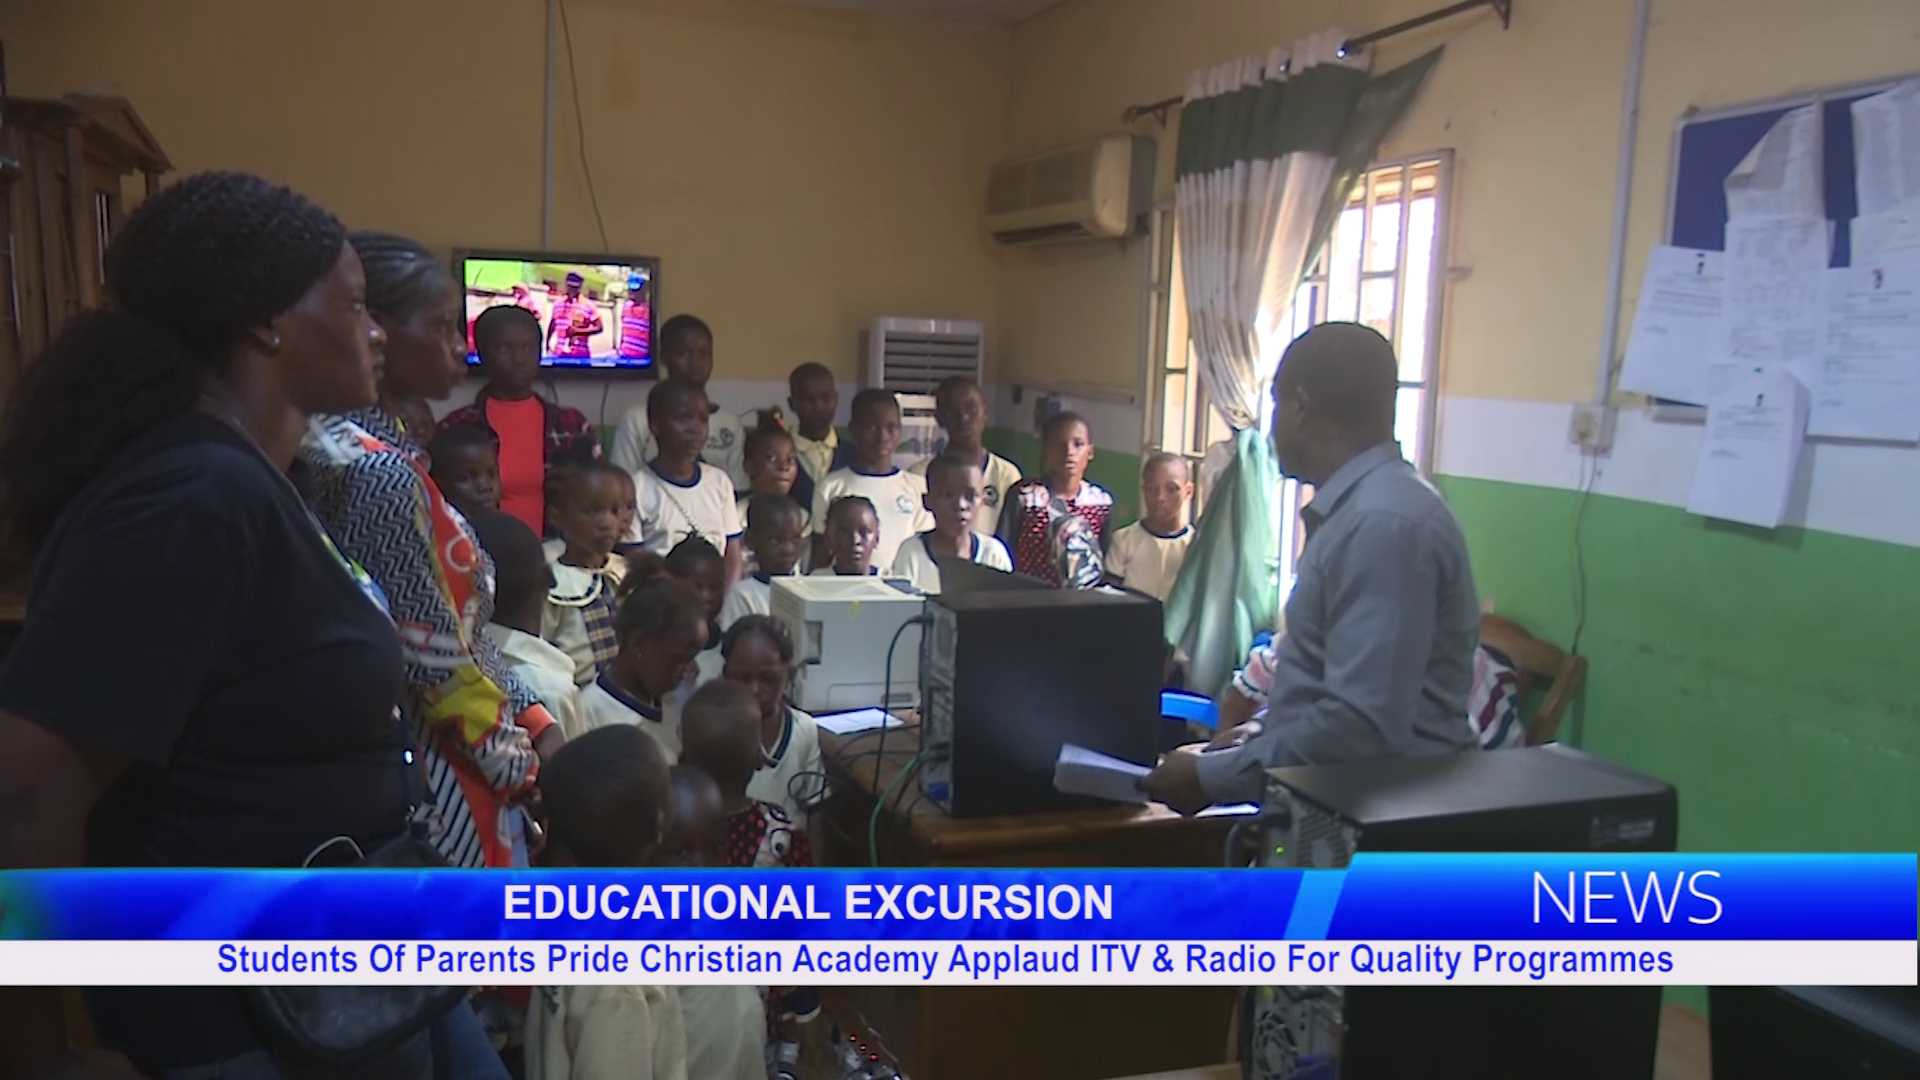 Students Of Parents Pride Christian Academy Applaud ITV & Radio For Quality Programmes